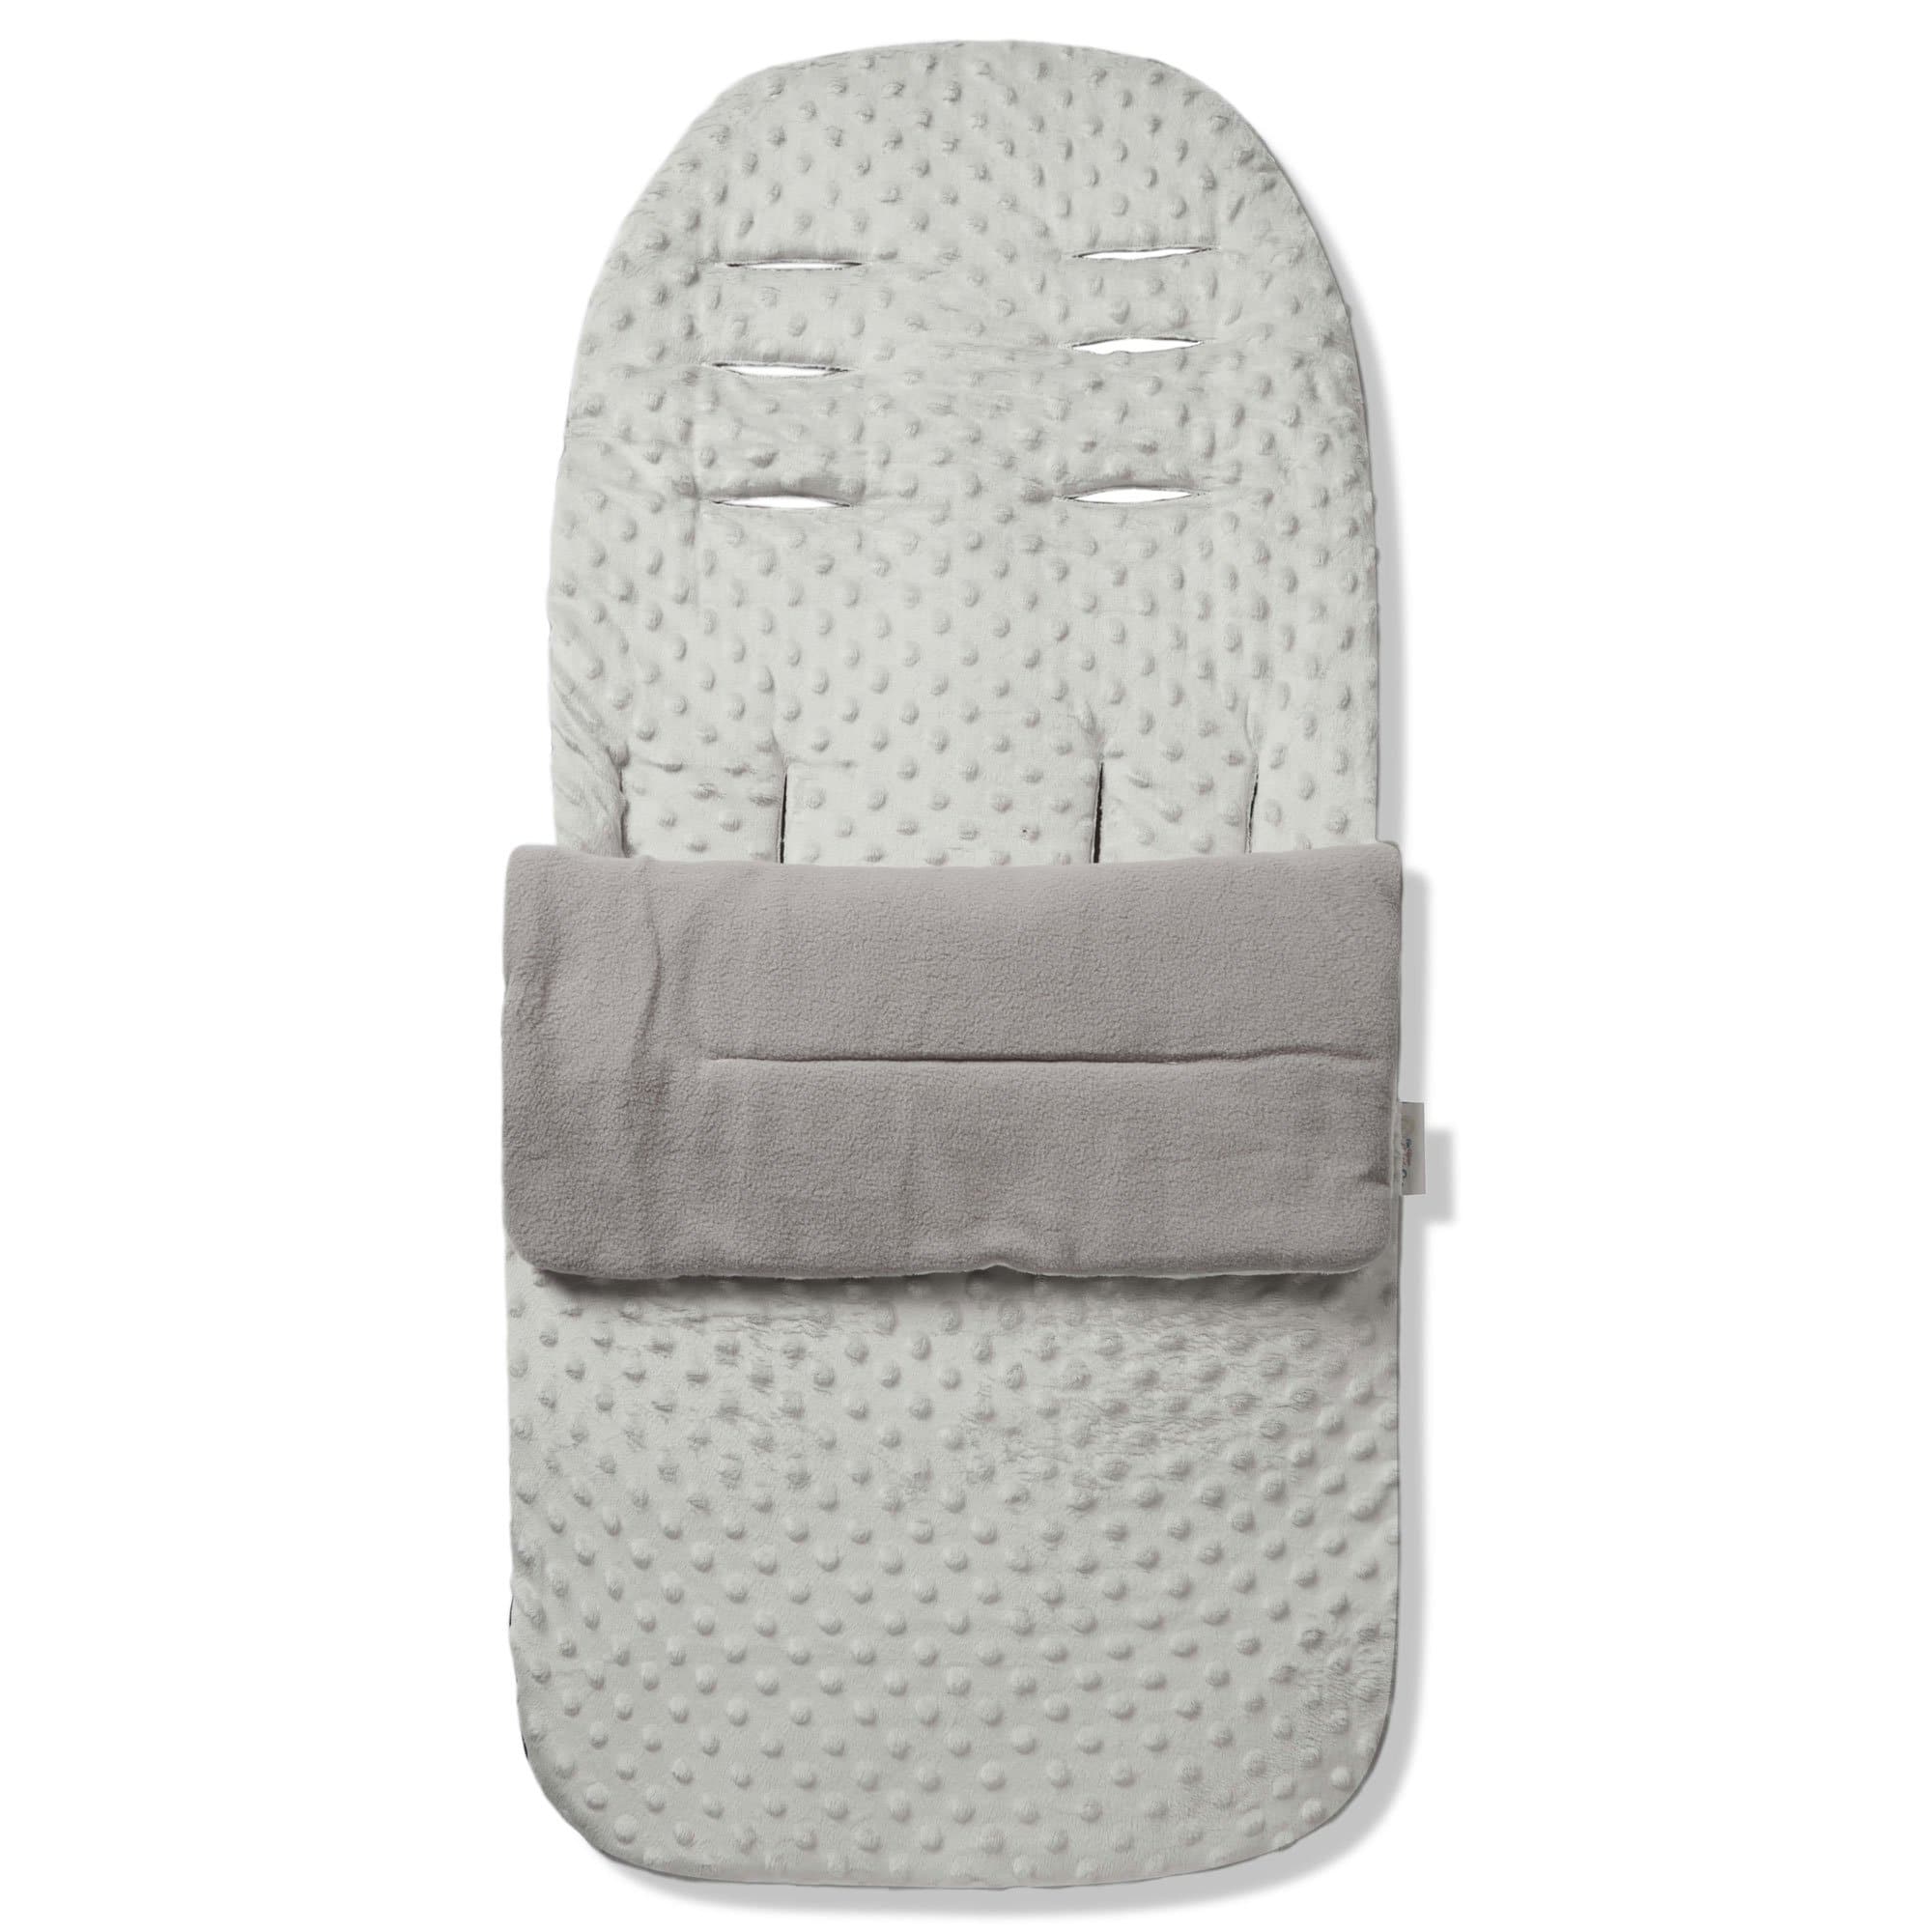 Dimple Footmuff / Cosy Toes Compatible with Urban Detour - Grey / Fits All Models | For Your Little One